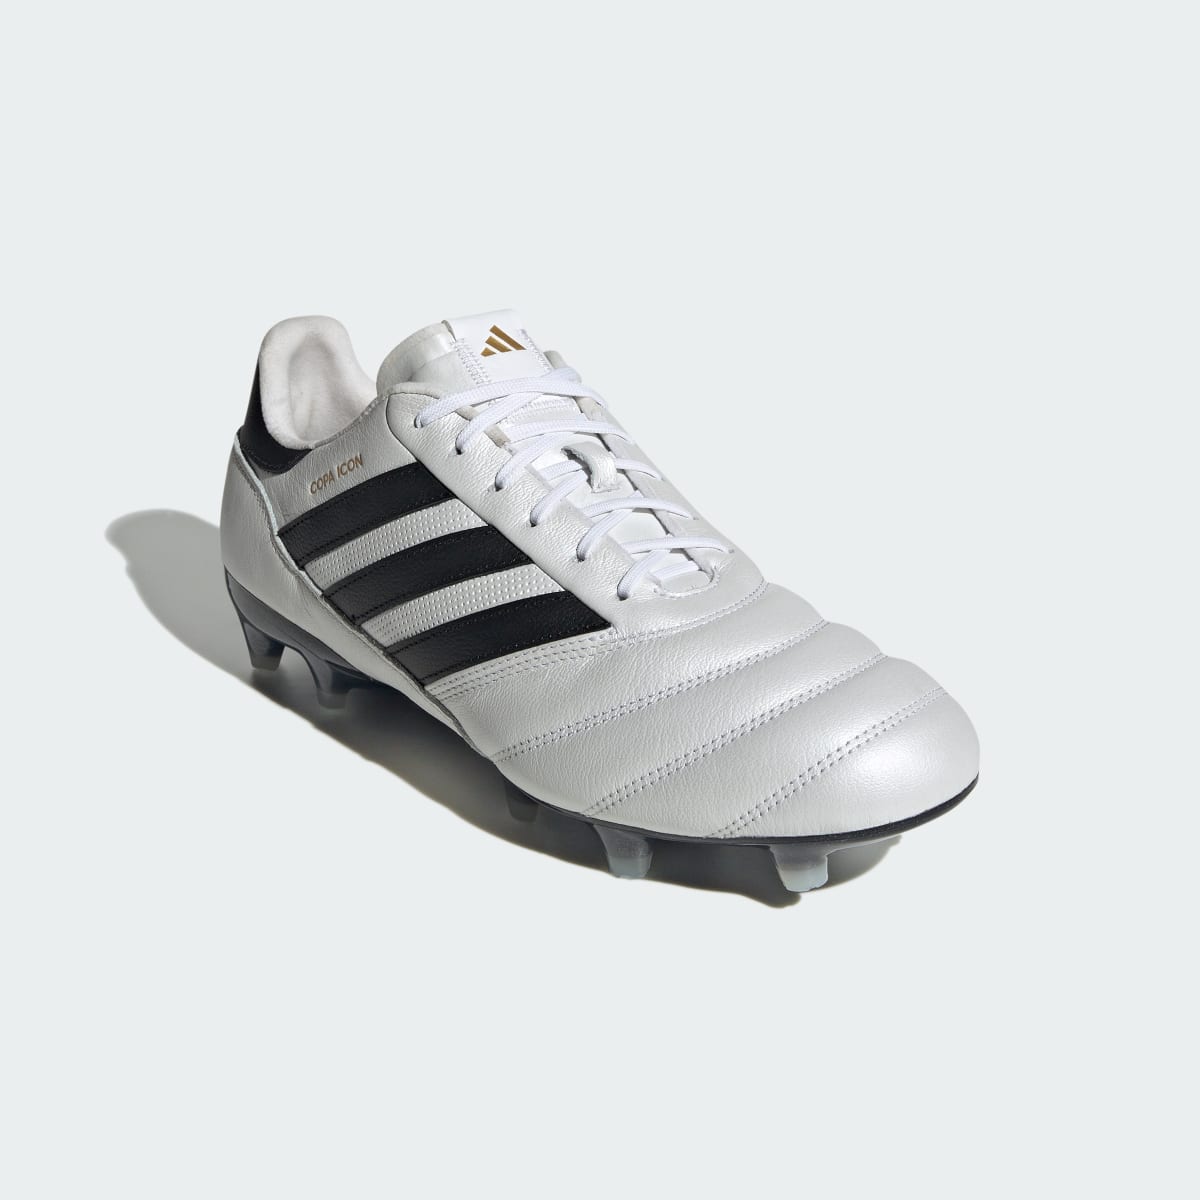 Adidas Copa Icon Firm Ground Boots. 5